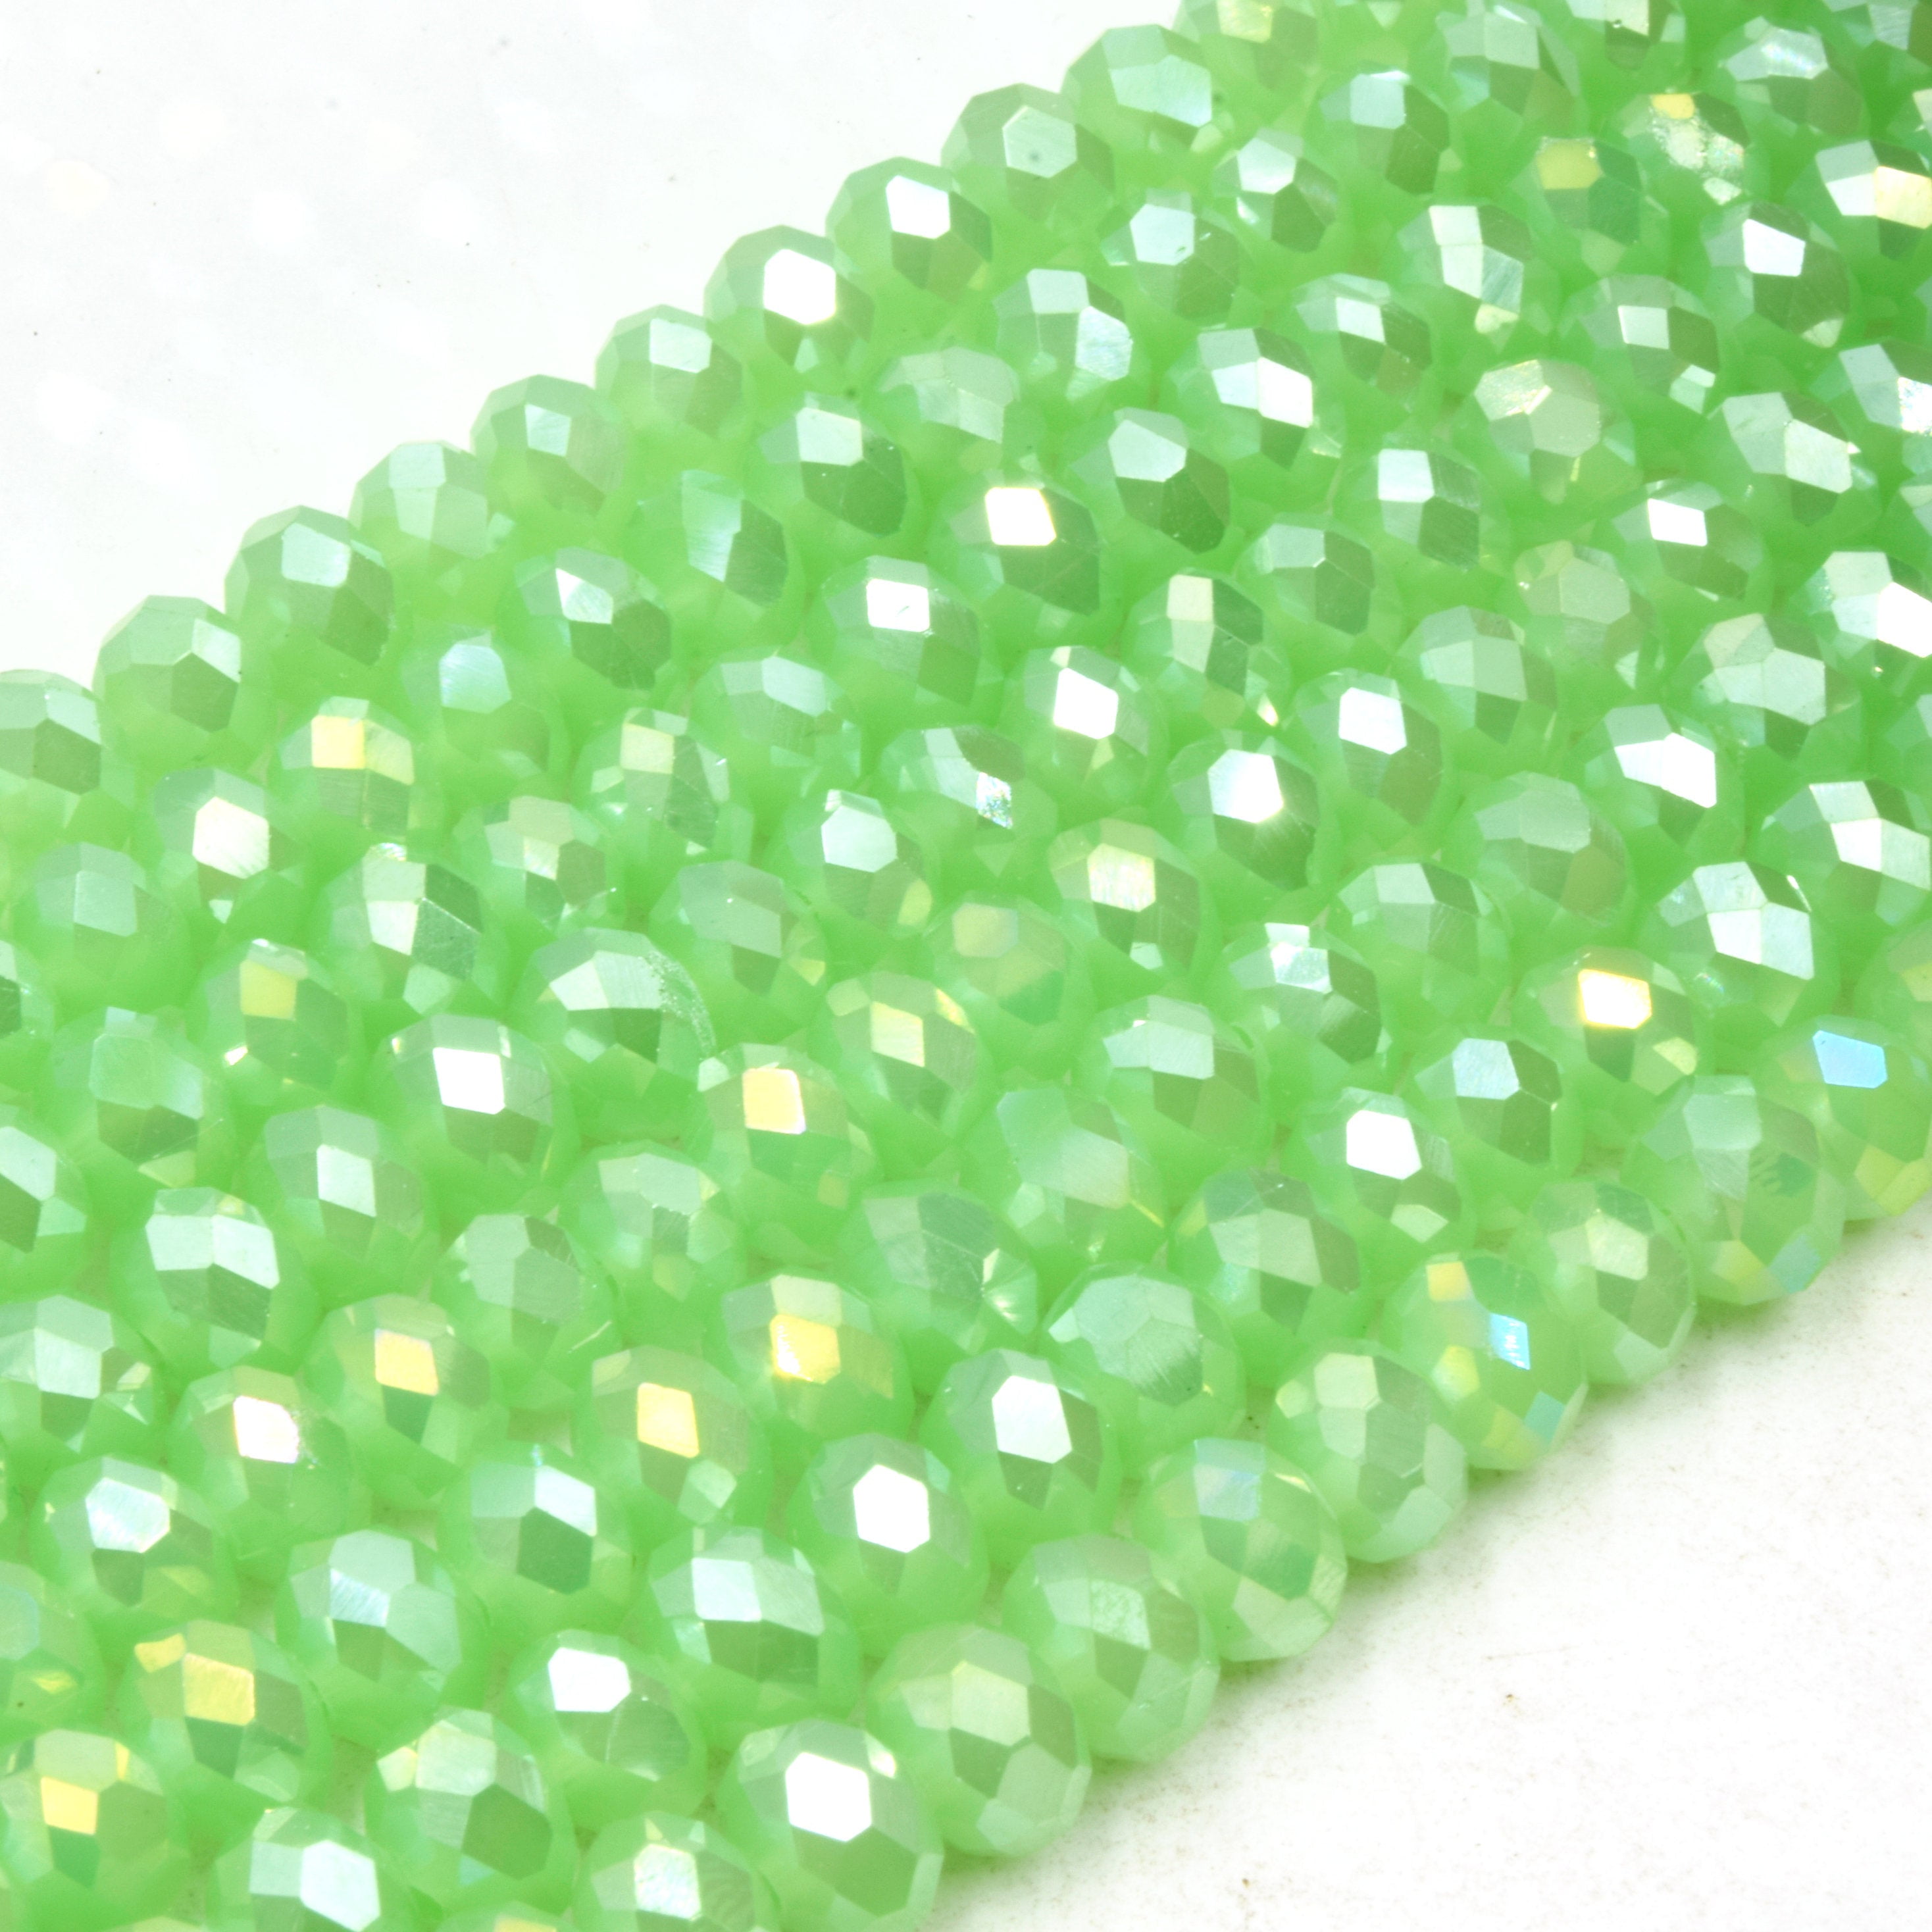 500 Pcs 8mm Translucent Olive Green Round Crystal Faceted Plastic Craft Beads